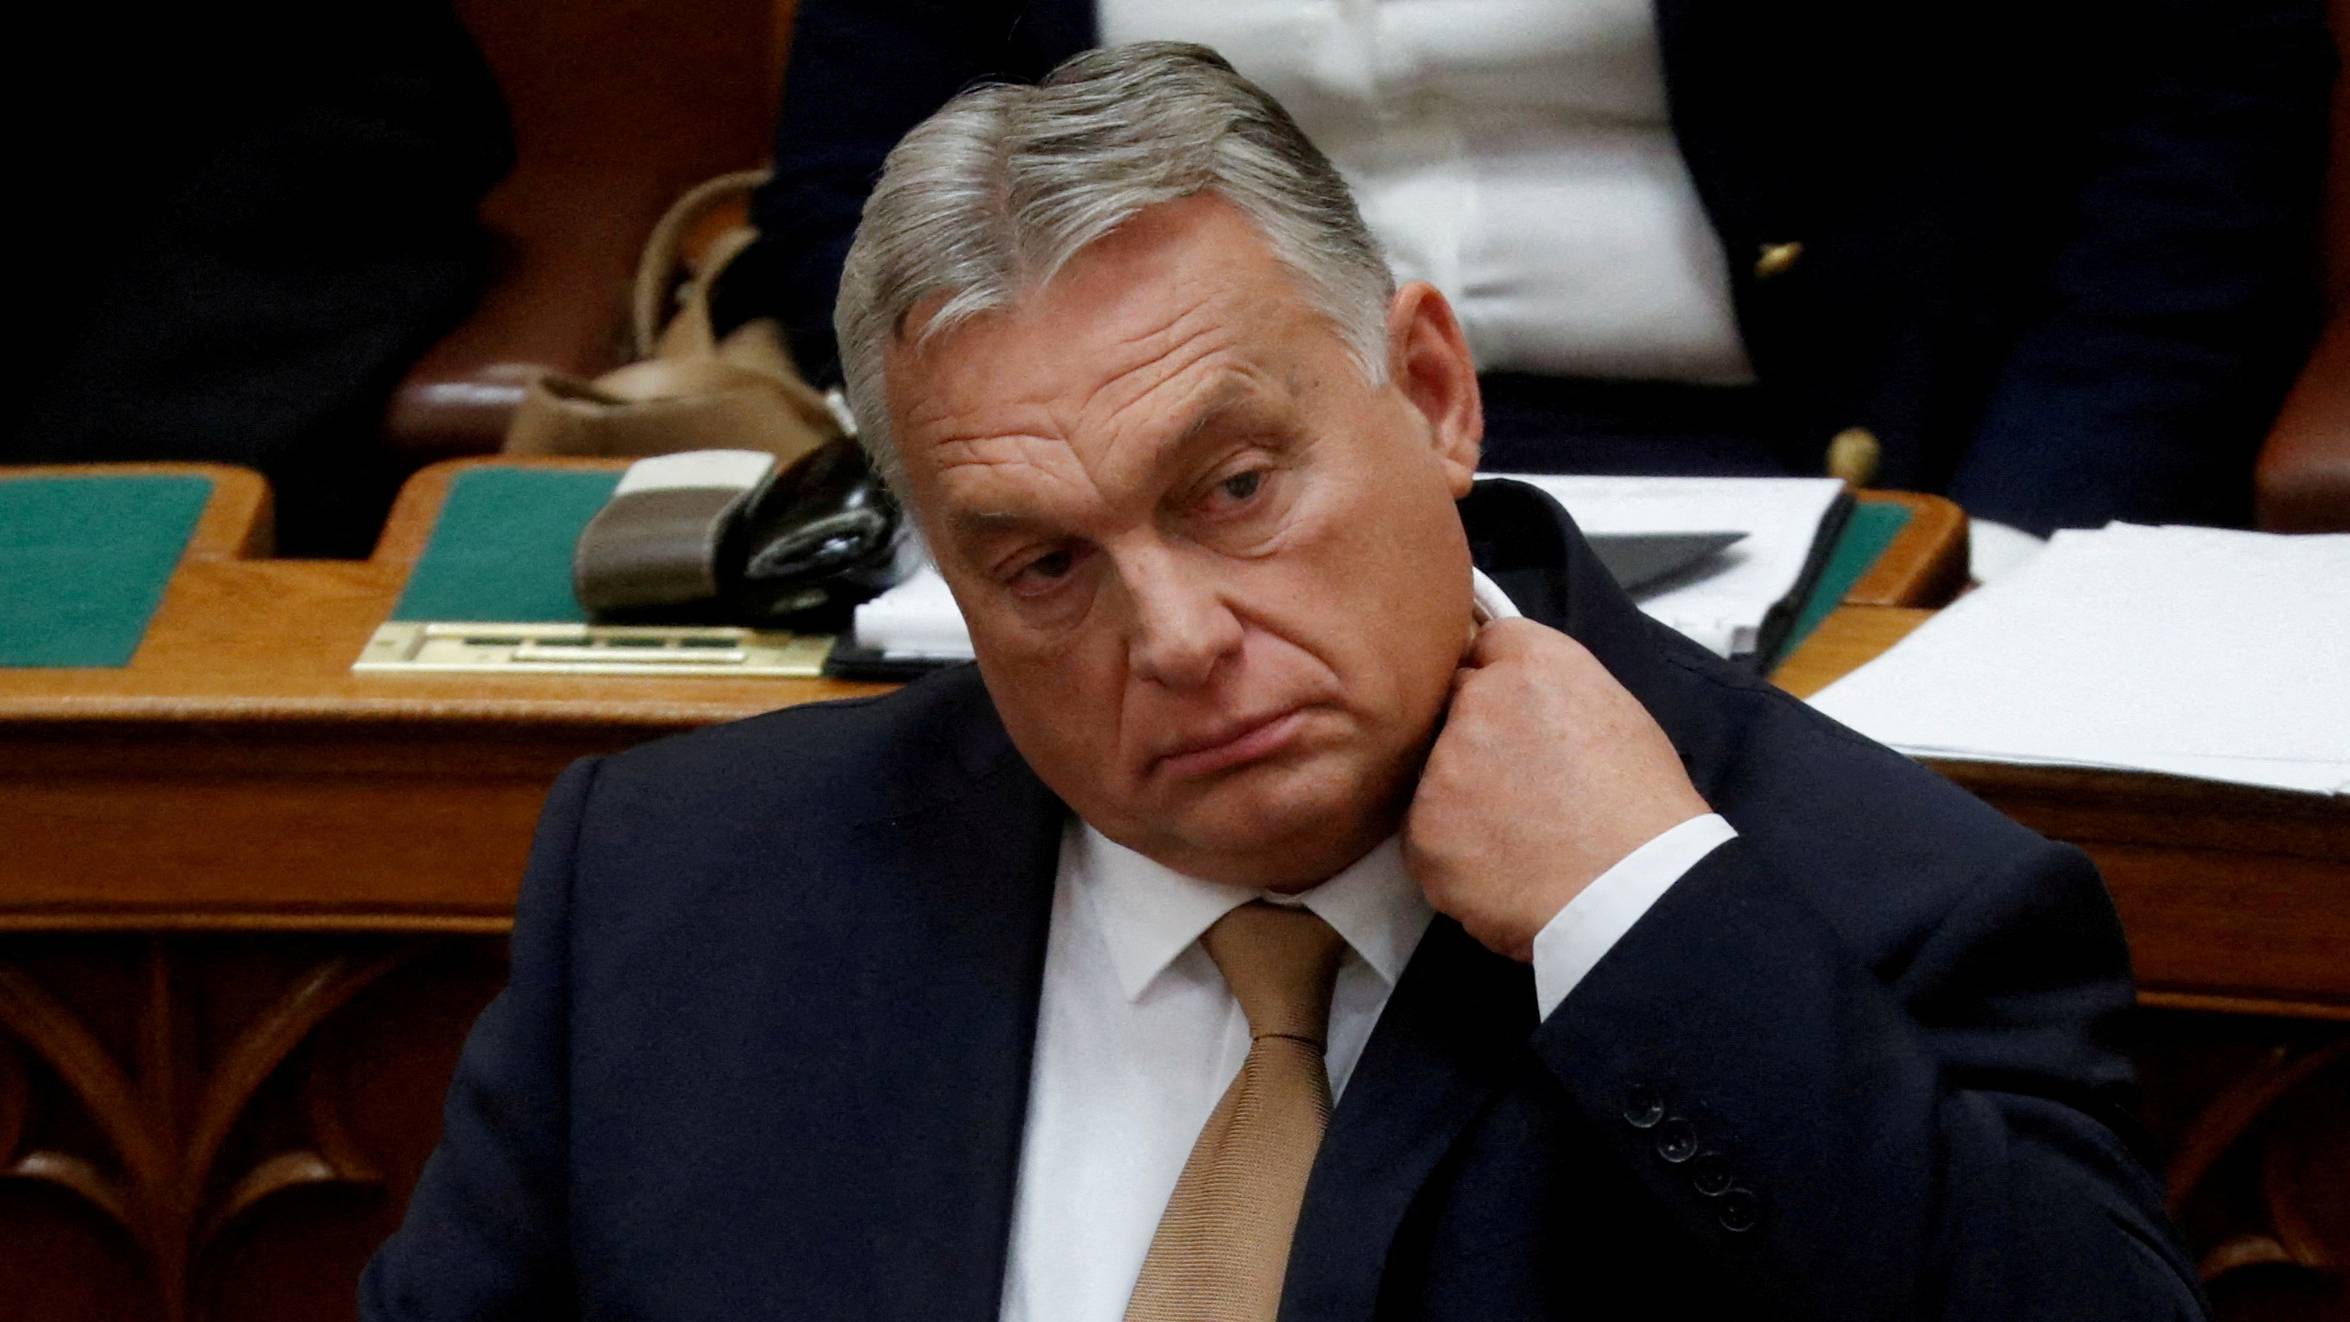 The EU executive approved Hungary's pandemic recovery plan but it won't get any payments until further reforms are made. /Bernadett Szabo/Reuters